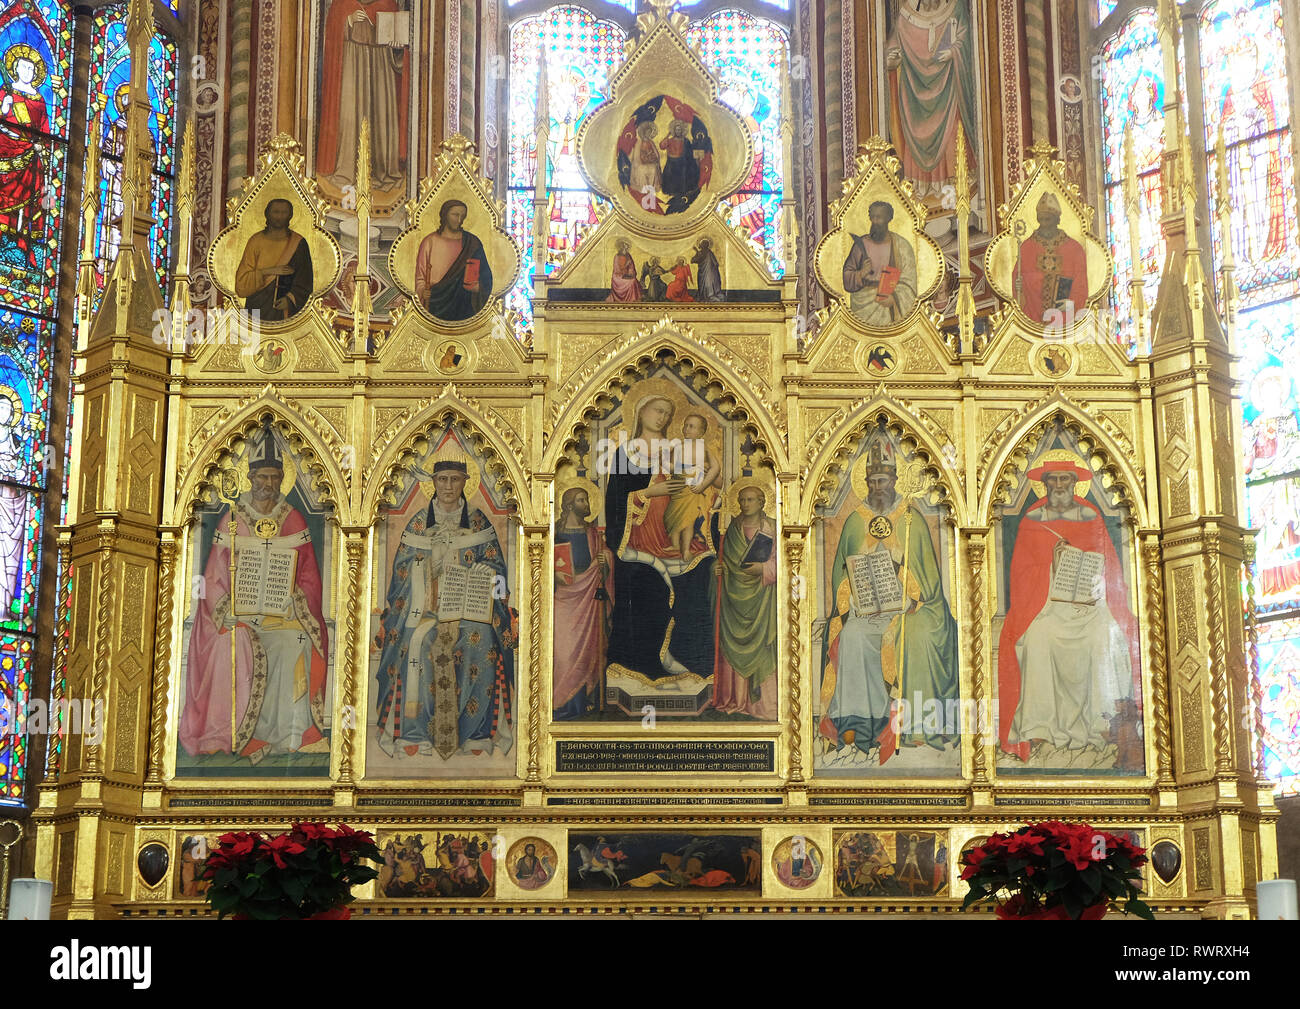 Madonna with the Child and the four Doctors of the Church - Polyptych of the high altar in the Basilica di Santa Croce in Florence Stock Photo